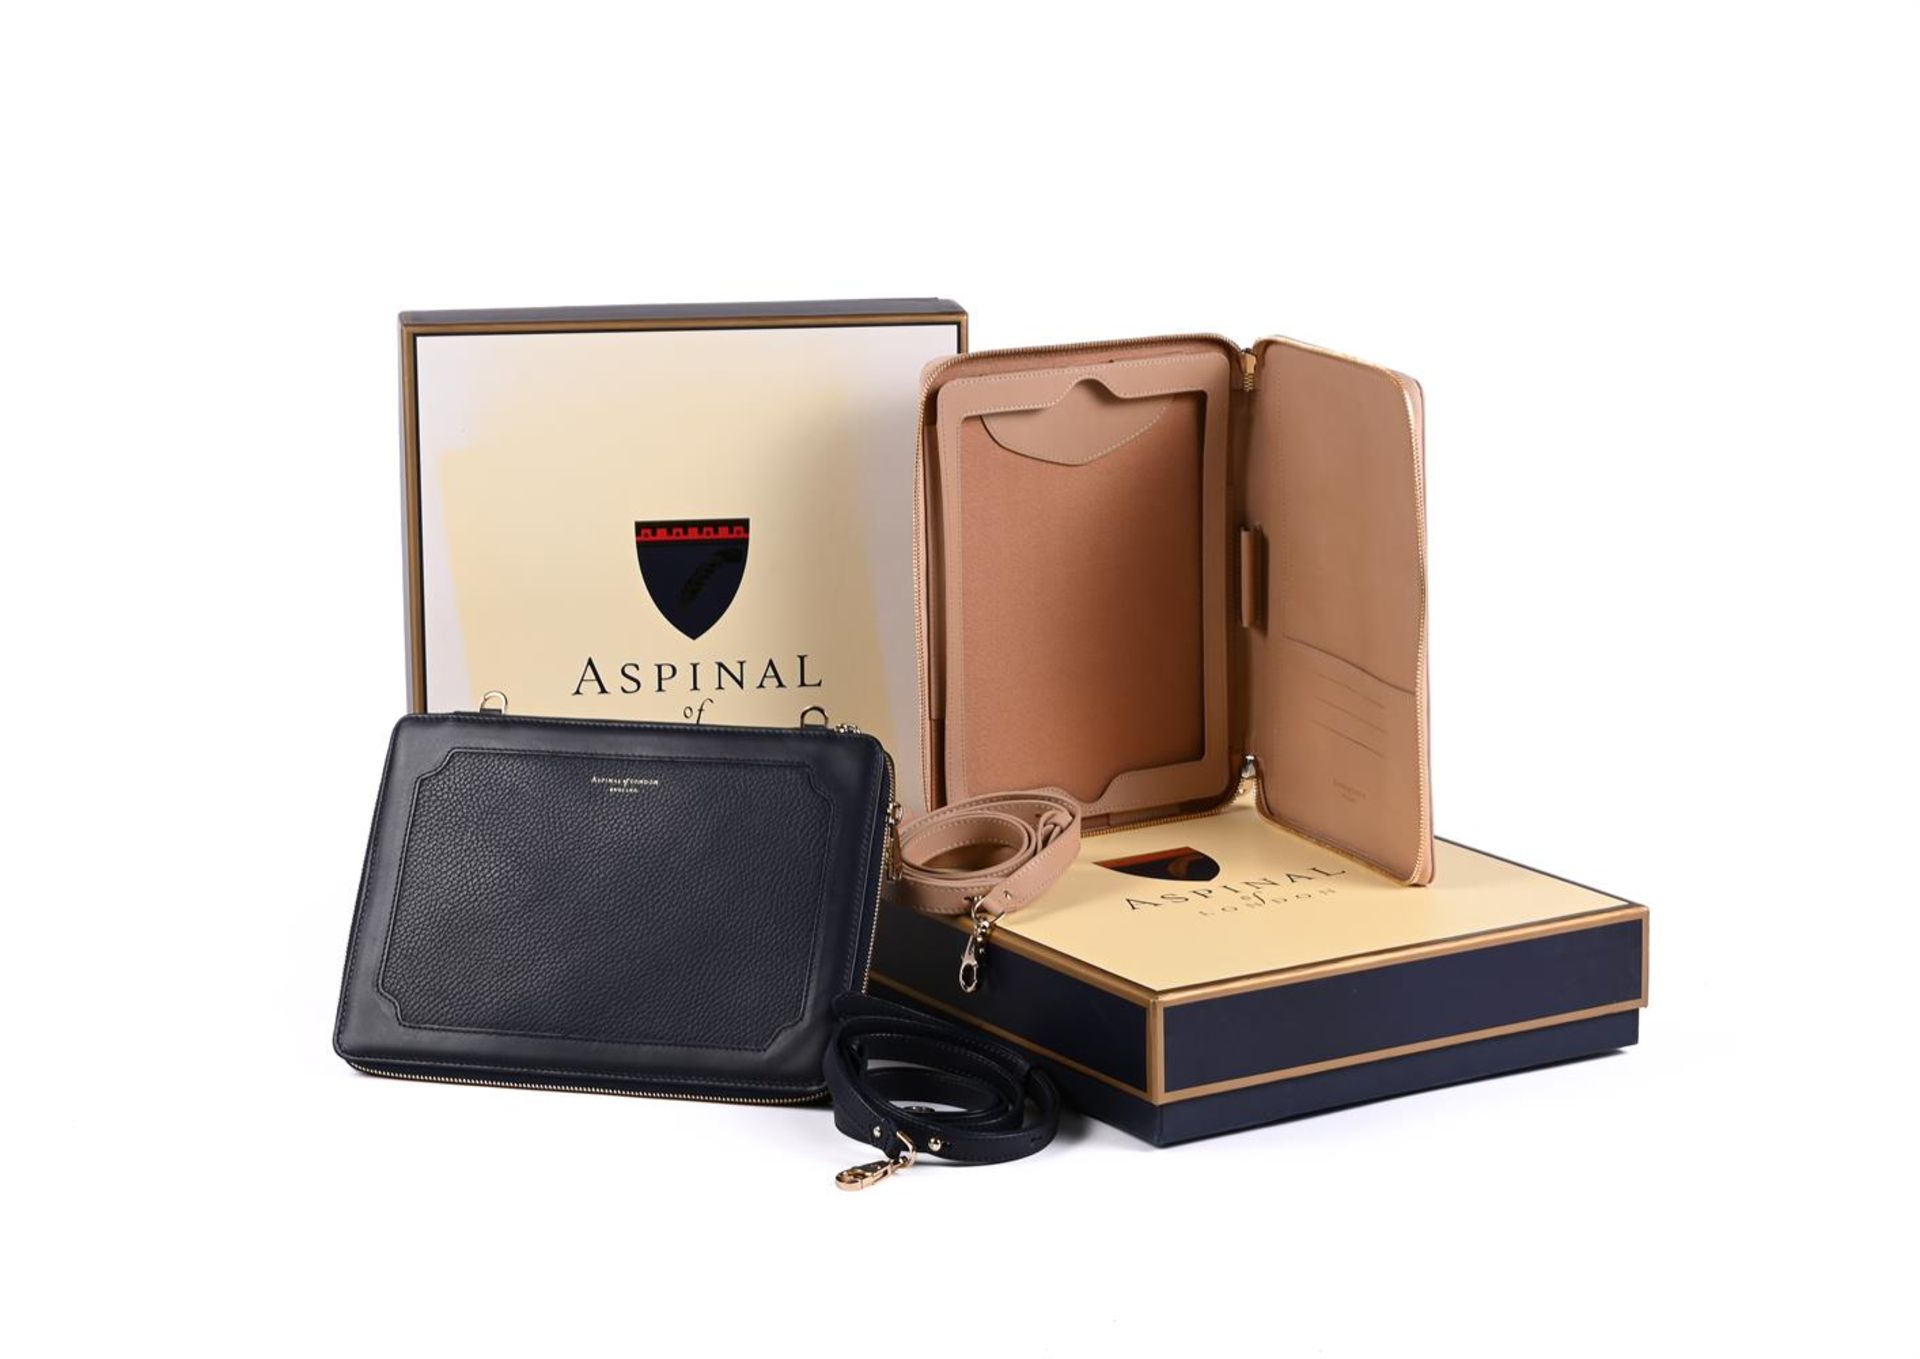 ASPINAL OF LONDON, A BLUE LEATHER I-PAD CASE